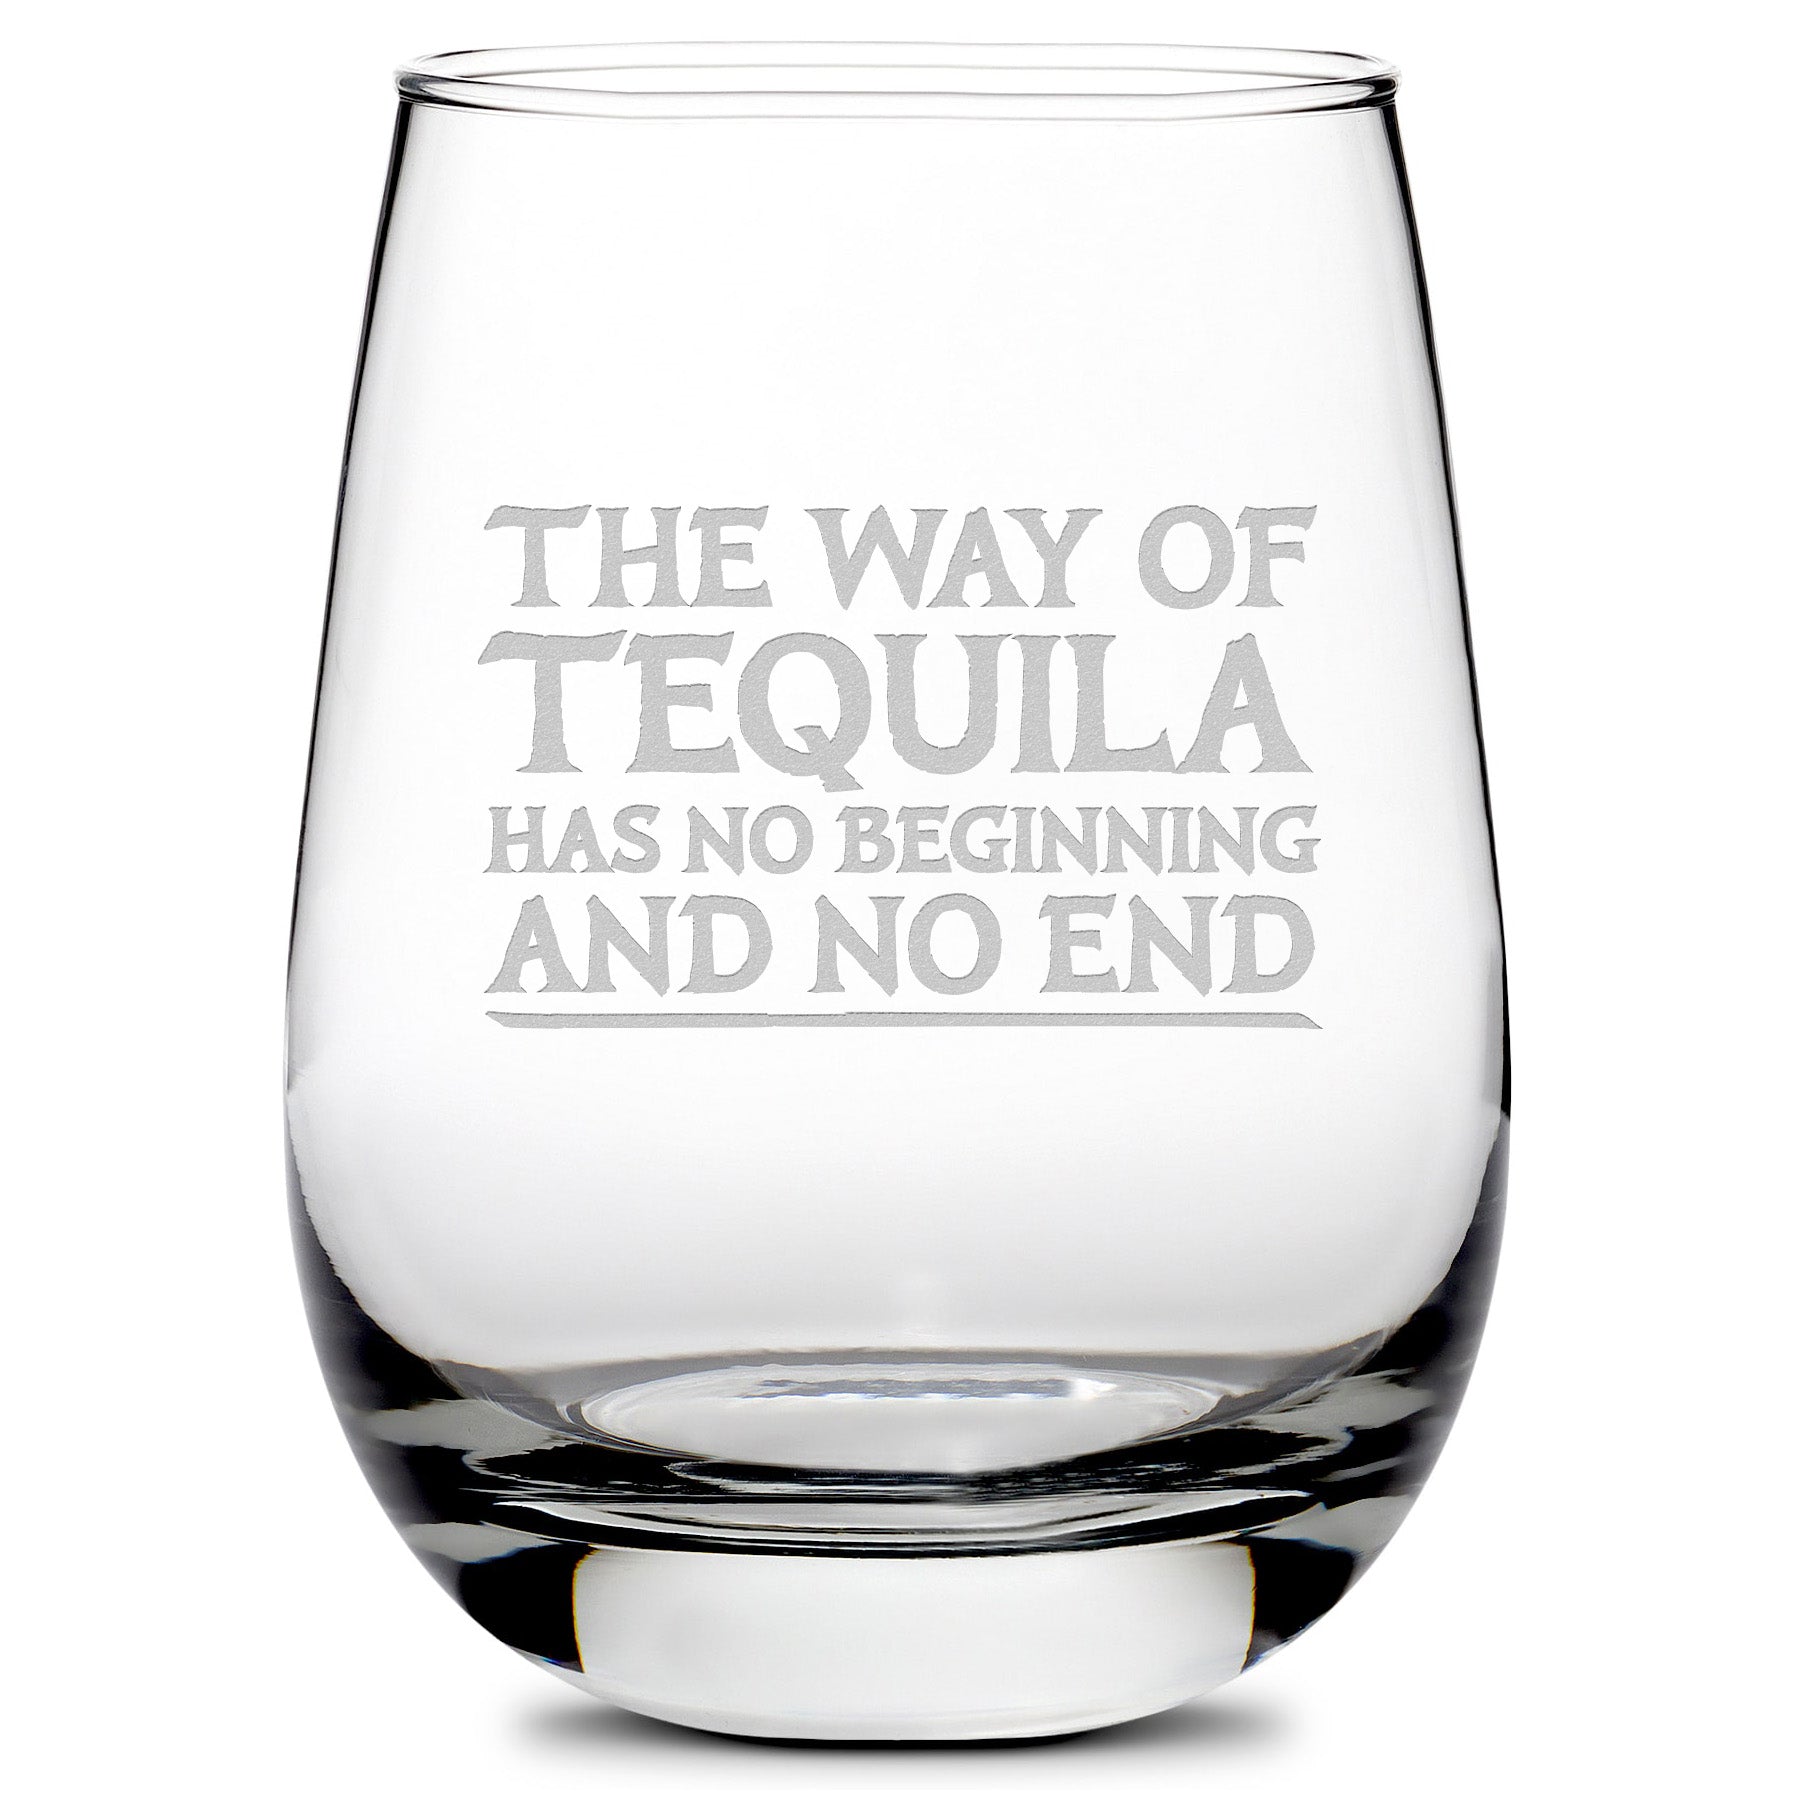 Premium Wine Glass, Avatar Way of Tequila, 16oz, Laser Etched or Hand Etched